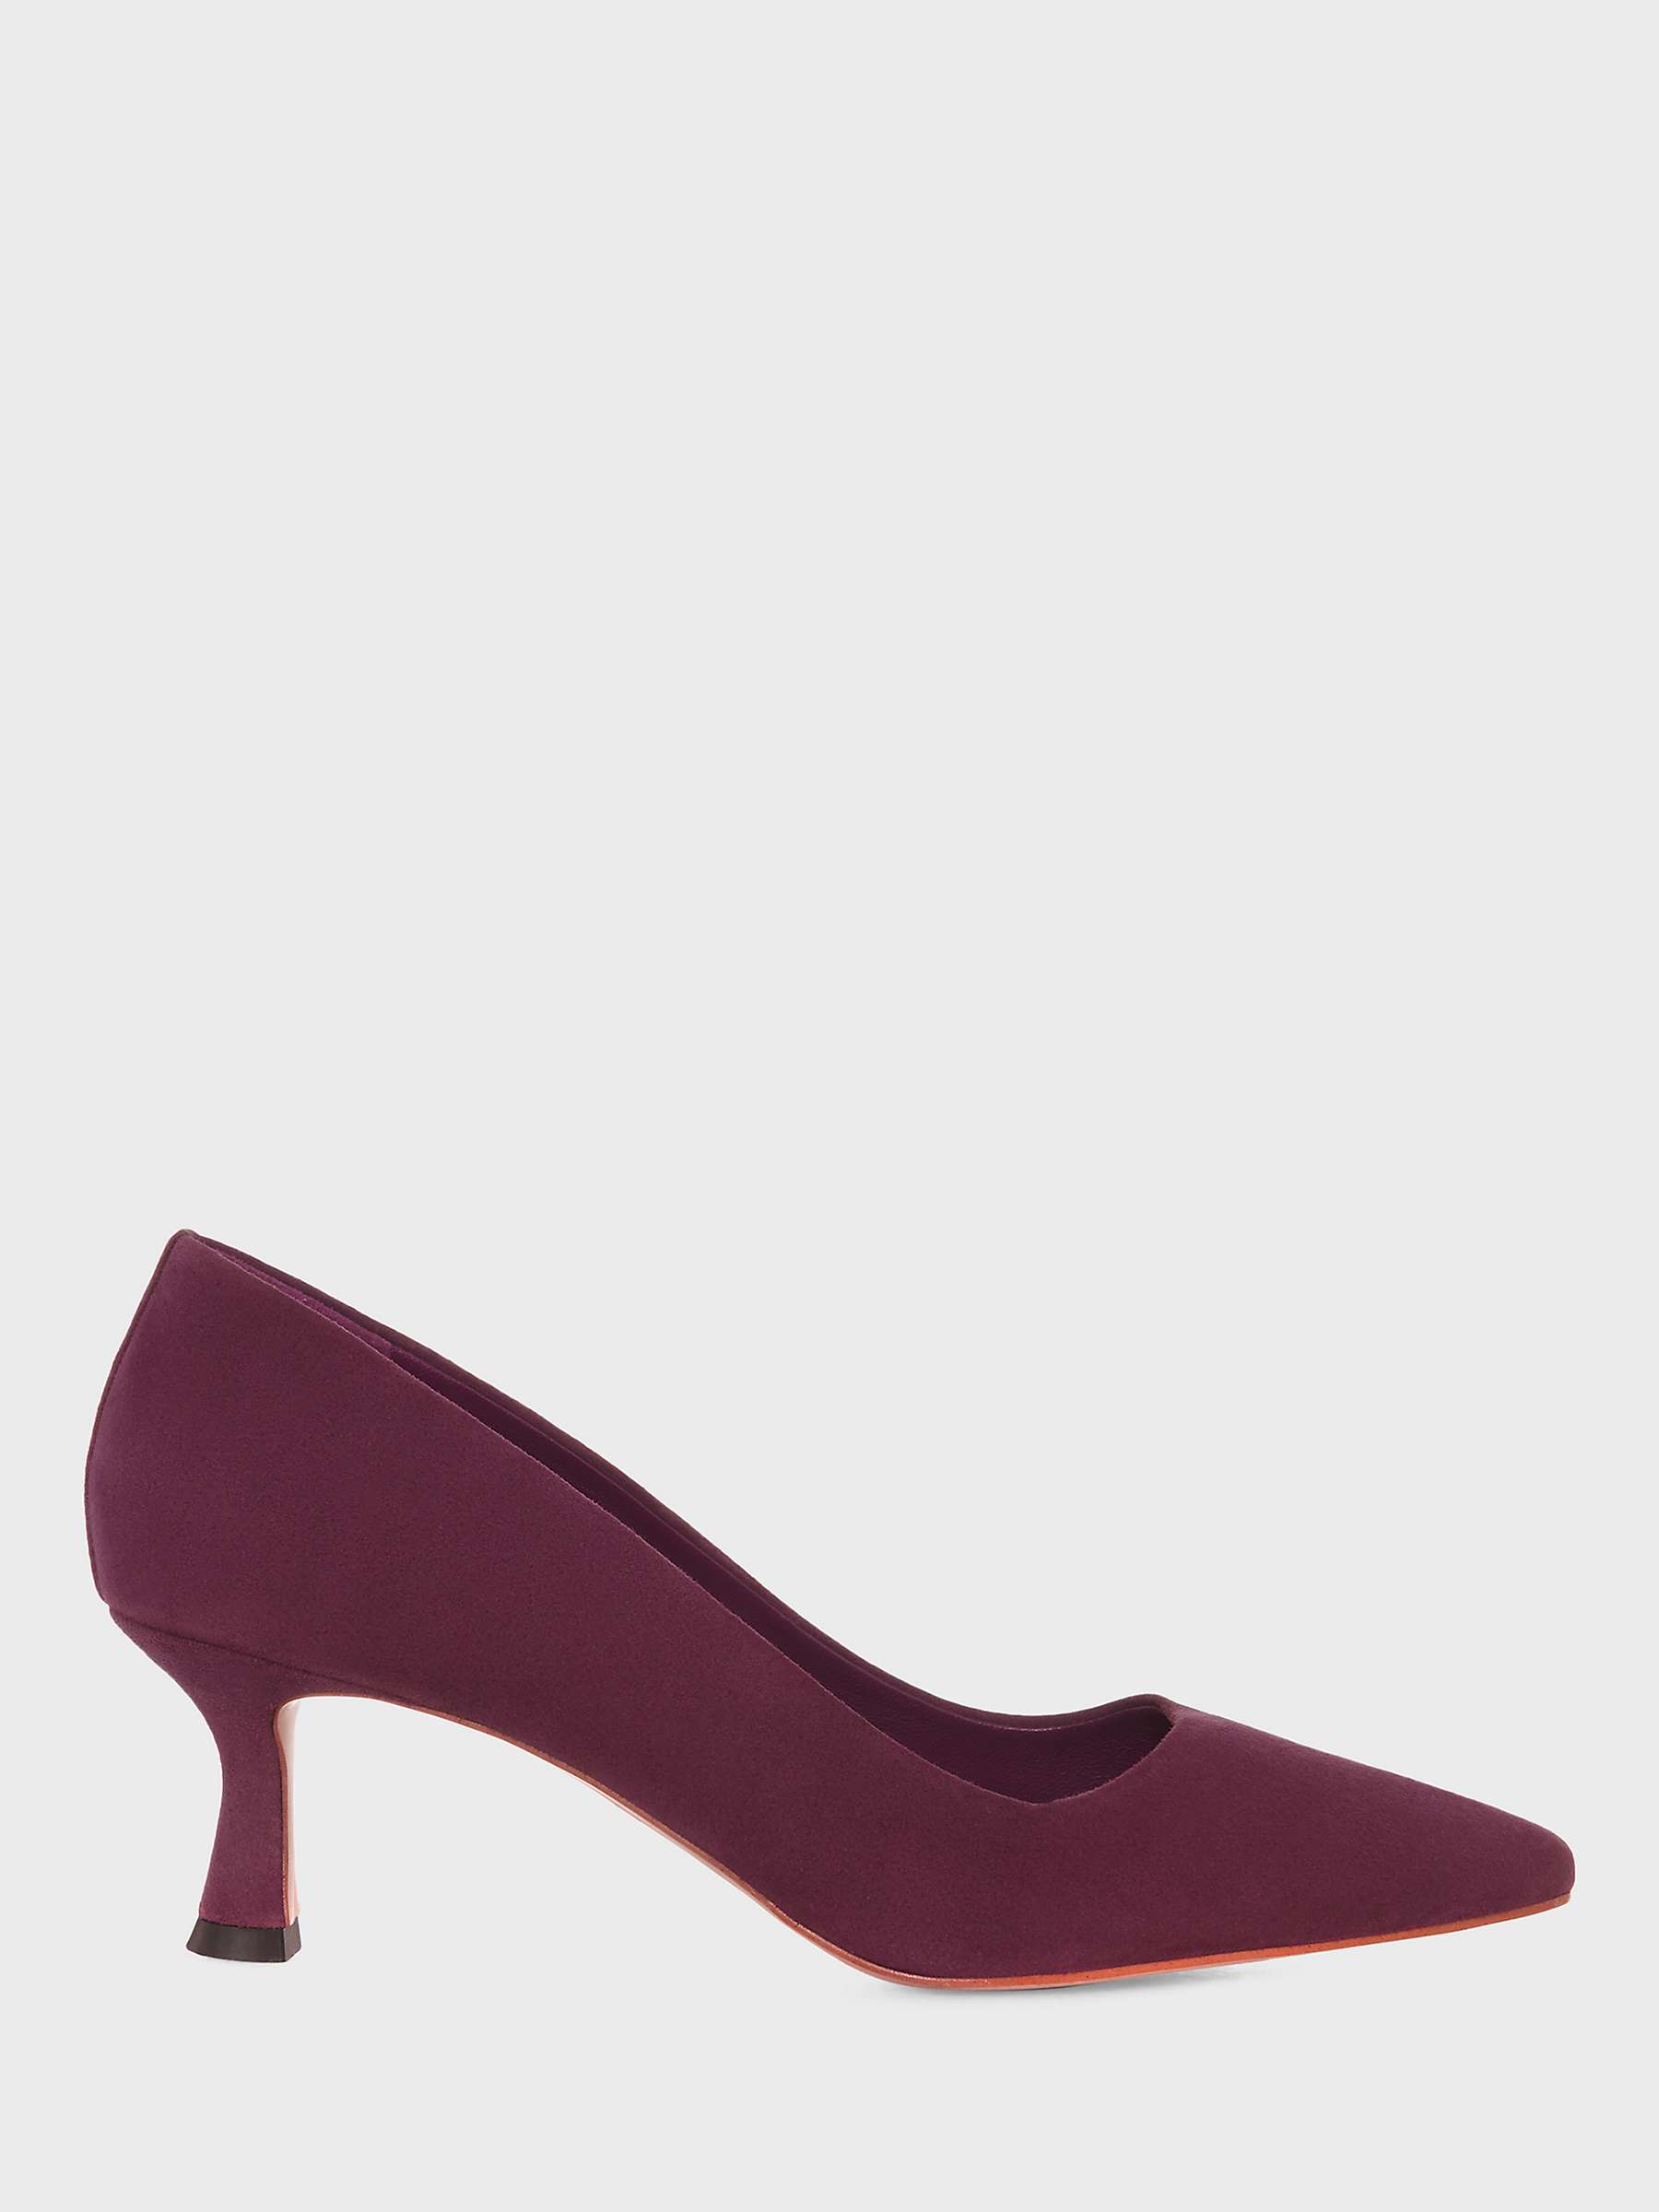 Hobbs Esther Suede Court Shoes, Deep Purple at John Lewis & Partners